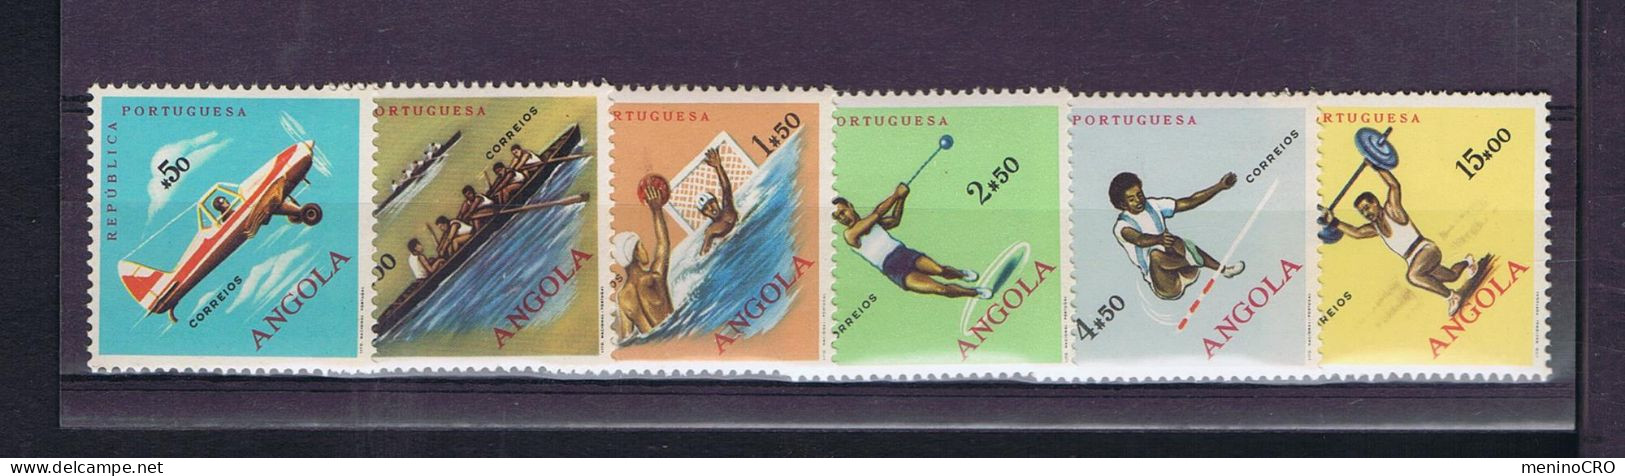 Gc8058 ANGOLA Sports Divers 1962 Set 6v. Mint Issue Portugal - Water-Polo